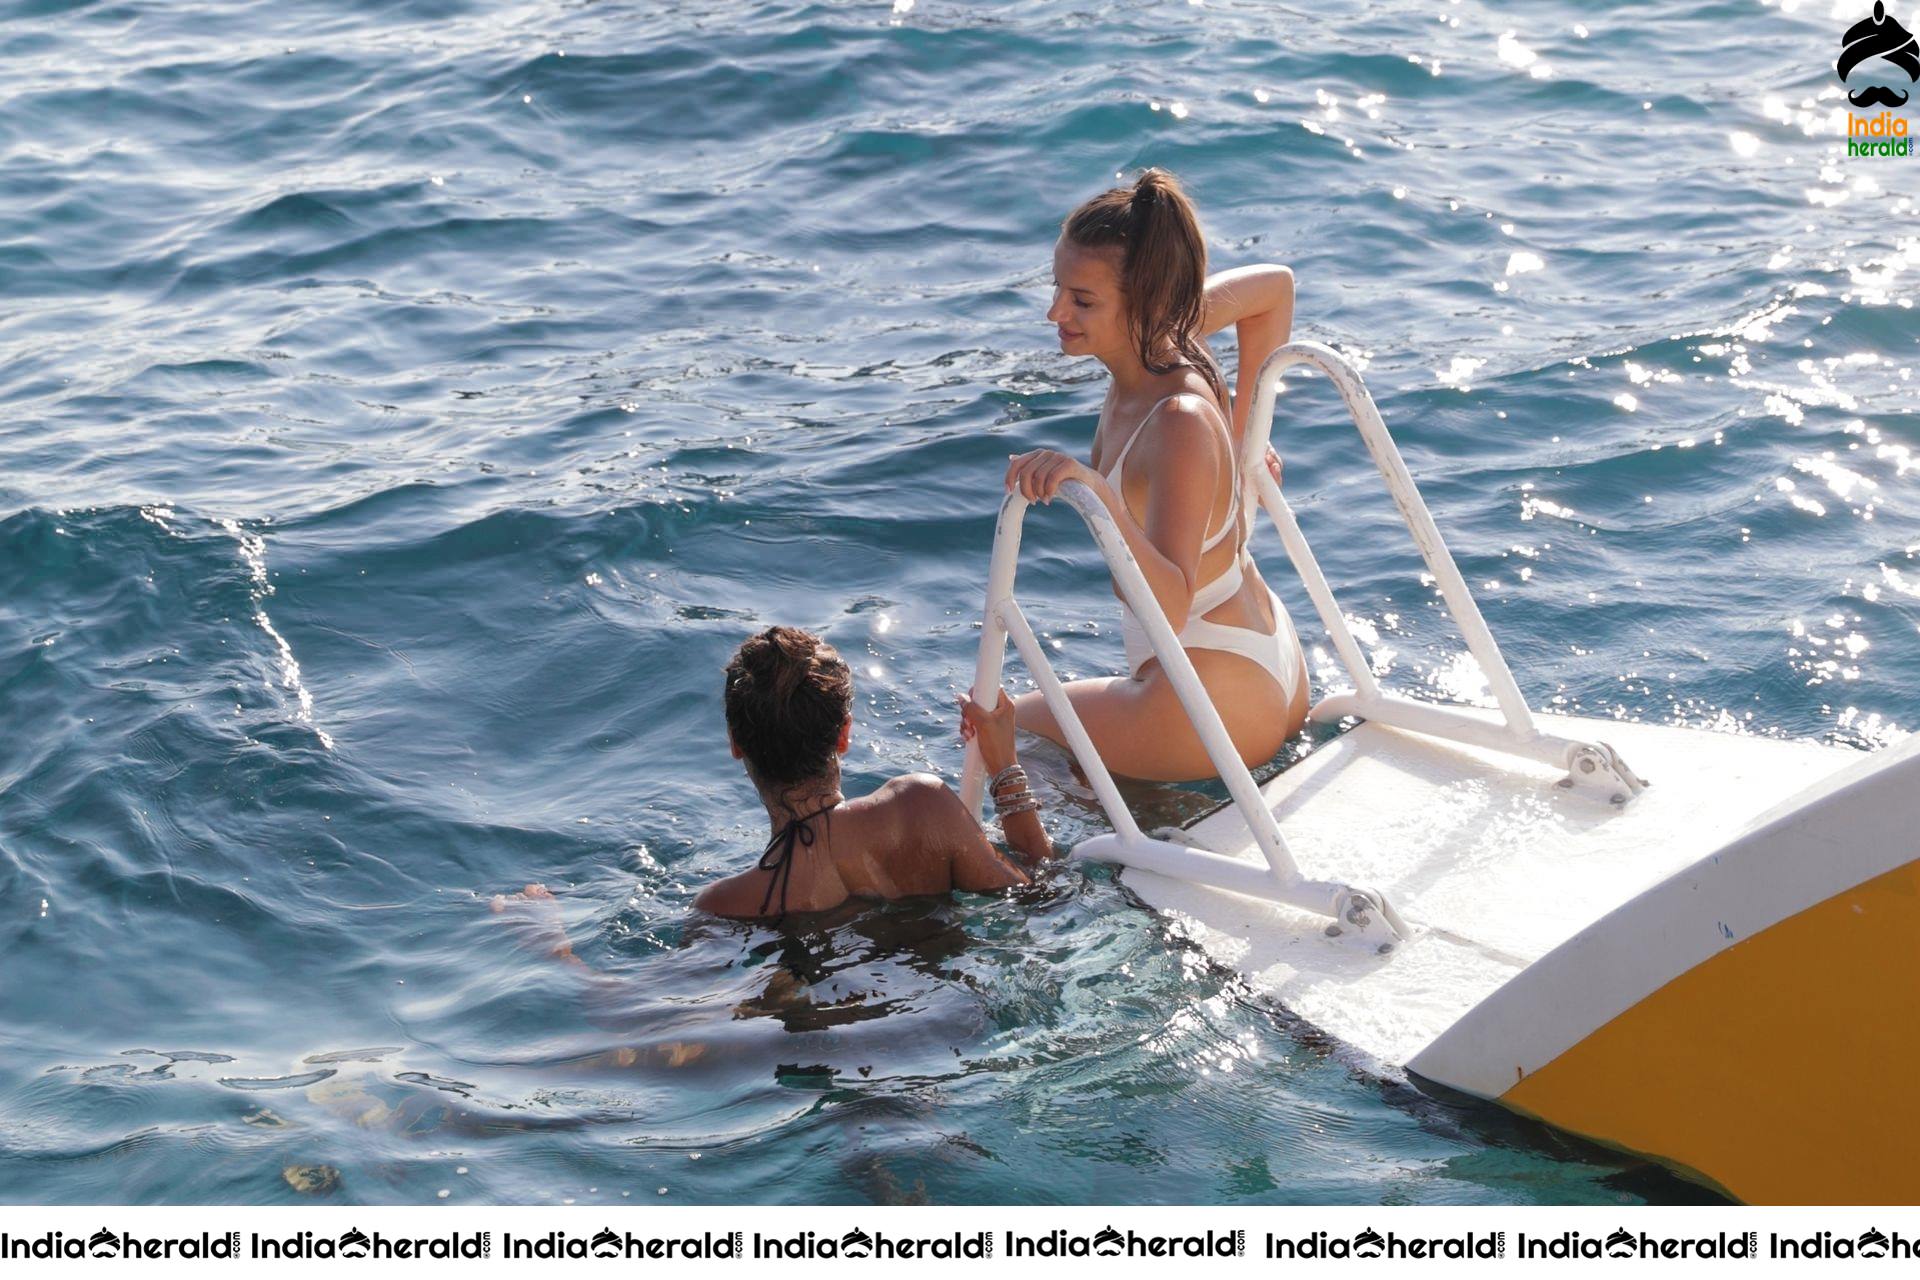 CJ Franco and Natalia Janoszek take a deep in the Caribbean Sea while vacationing in Jamaica